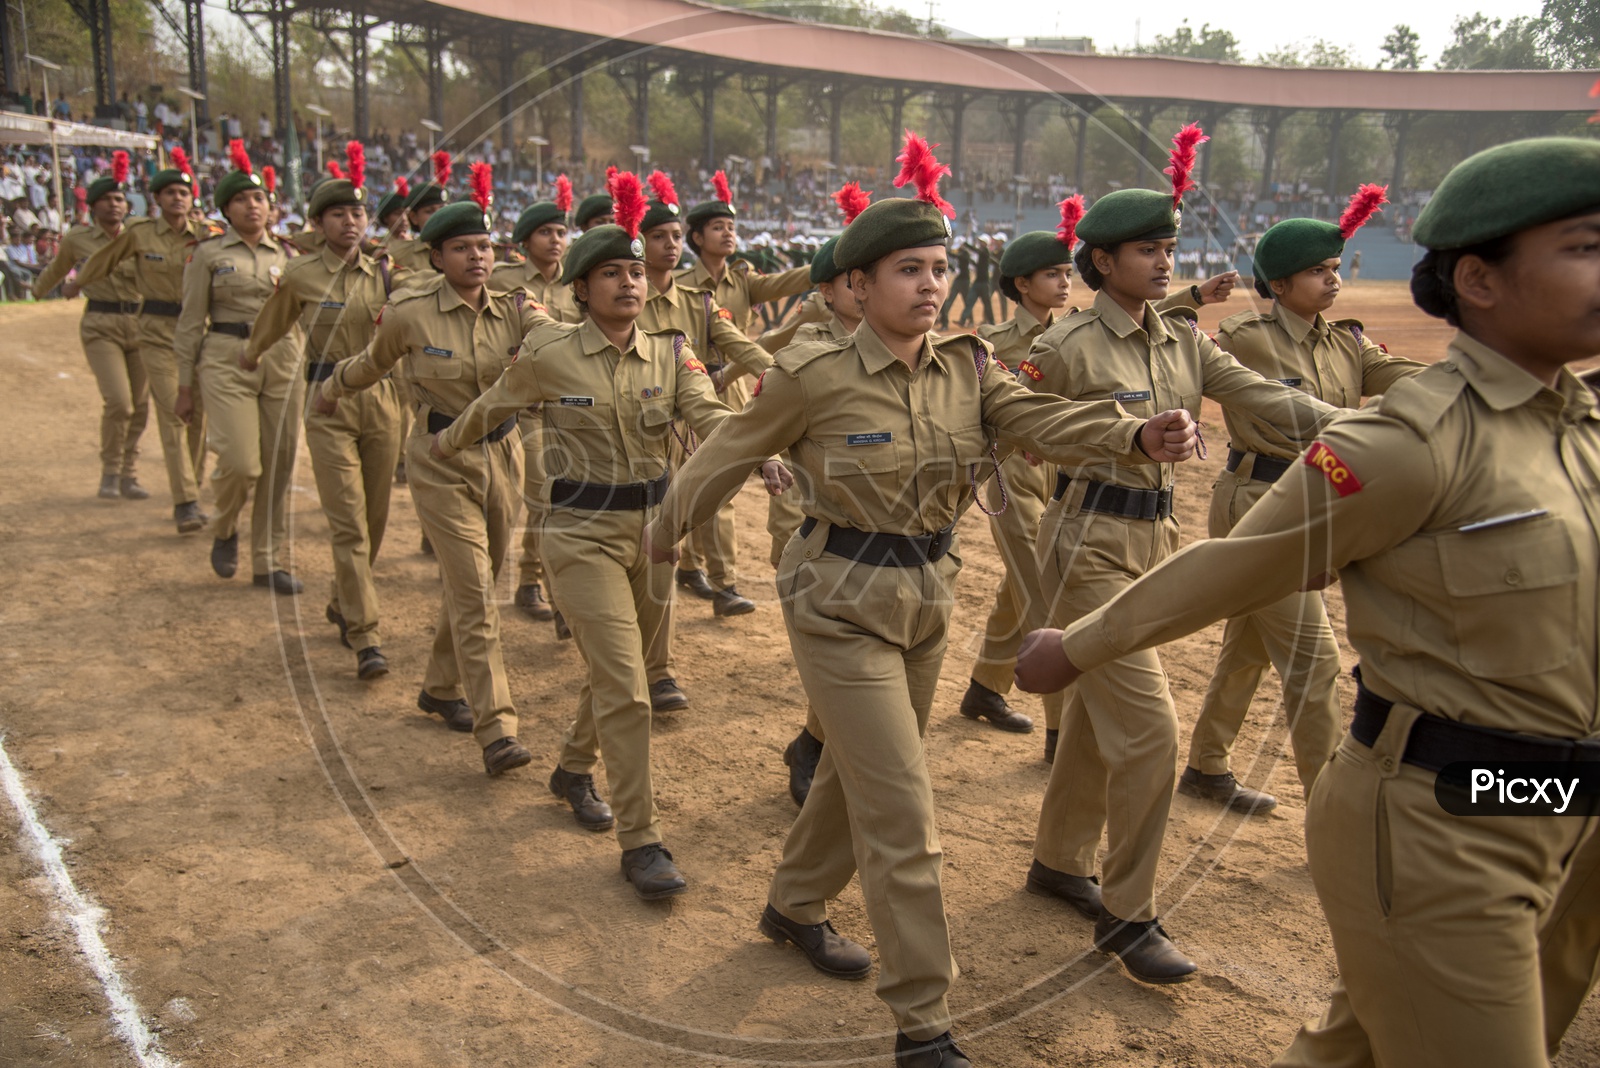 Image of NCC Cadet Girls Marching In Independence Day Parade-ST700815-Picxy